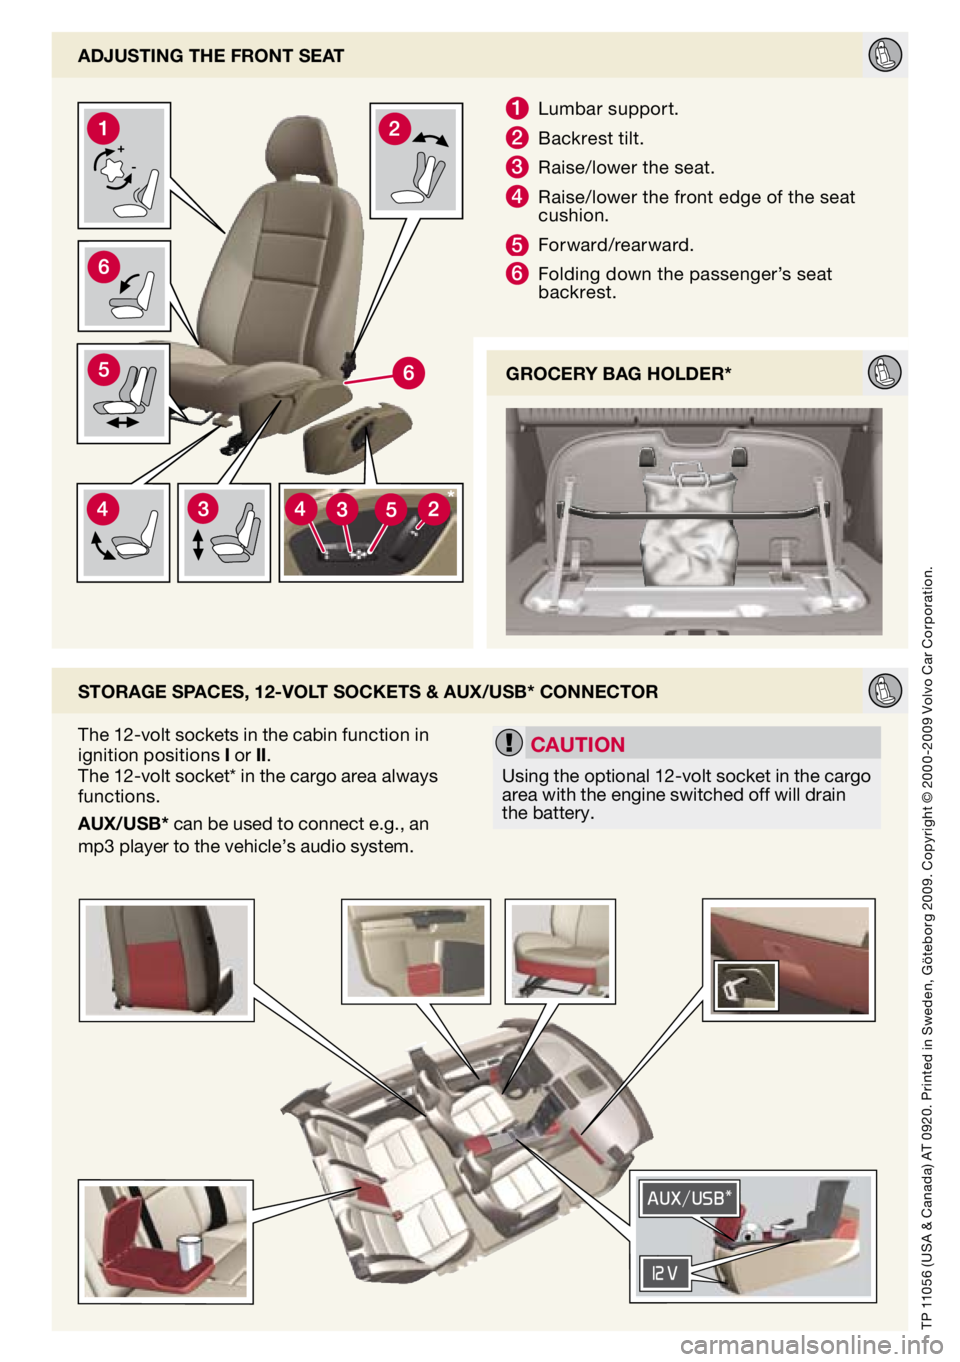 VOLVO V50 2010  Quick Guide 
adjUStIng the Front Seat
Storage SpaceS, 12-volt SocketS & aUX/USb* connector
1  lumbar support.
2  b ackrest tilt.
3 Raise/lower the seat.
4 Raise/lower the front edge of the seat cushion.
5 Forward